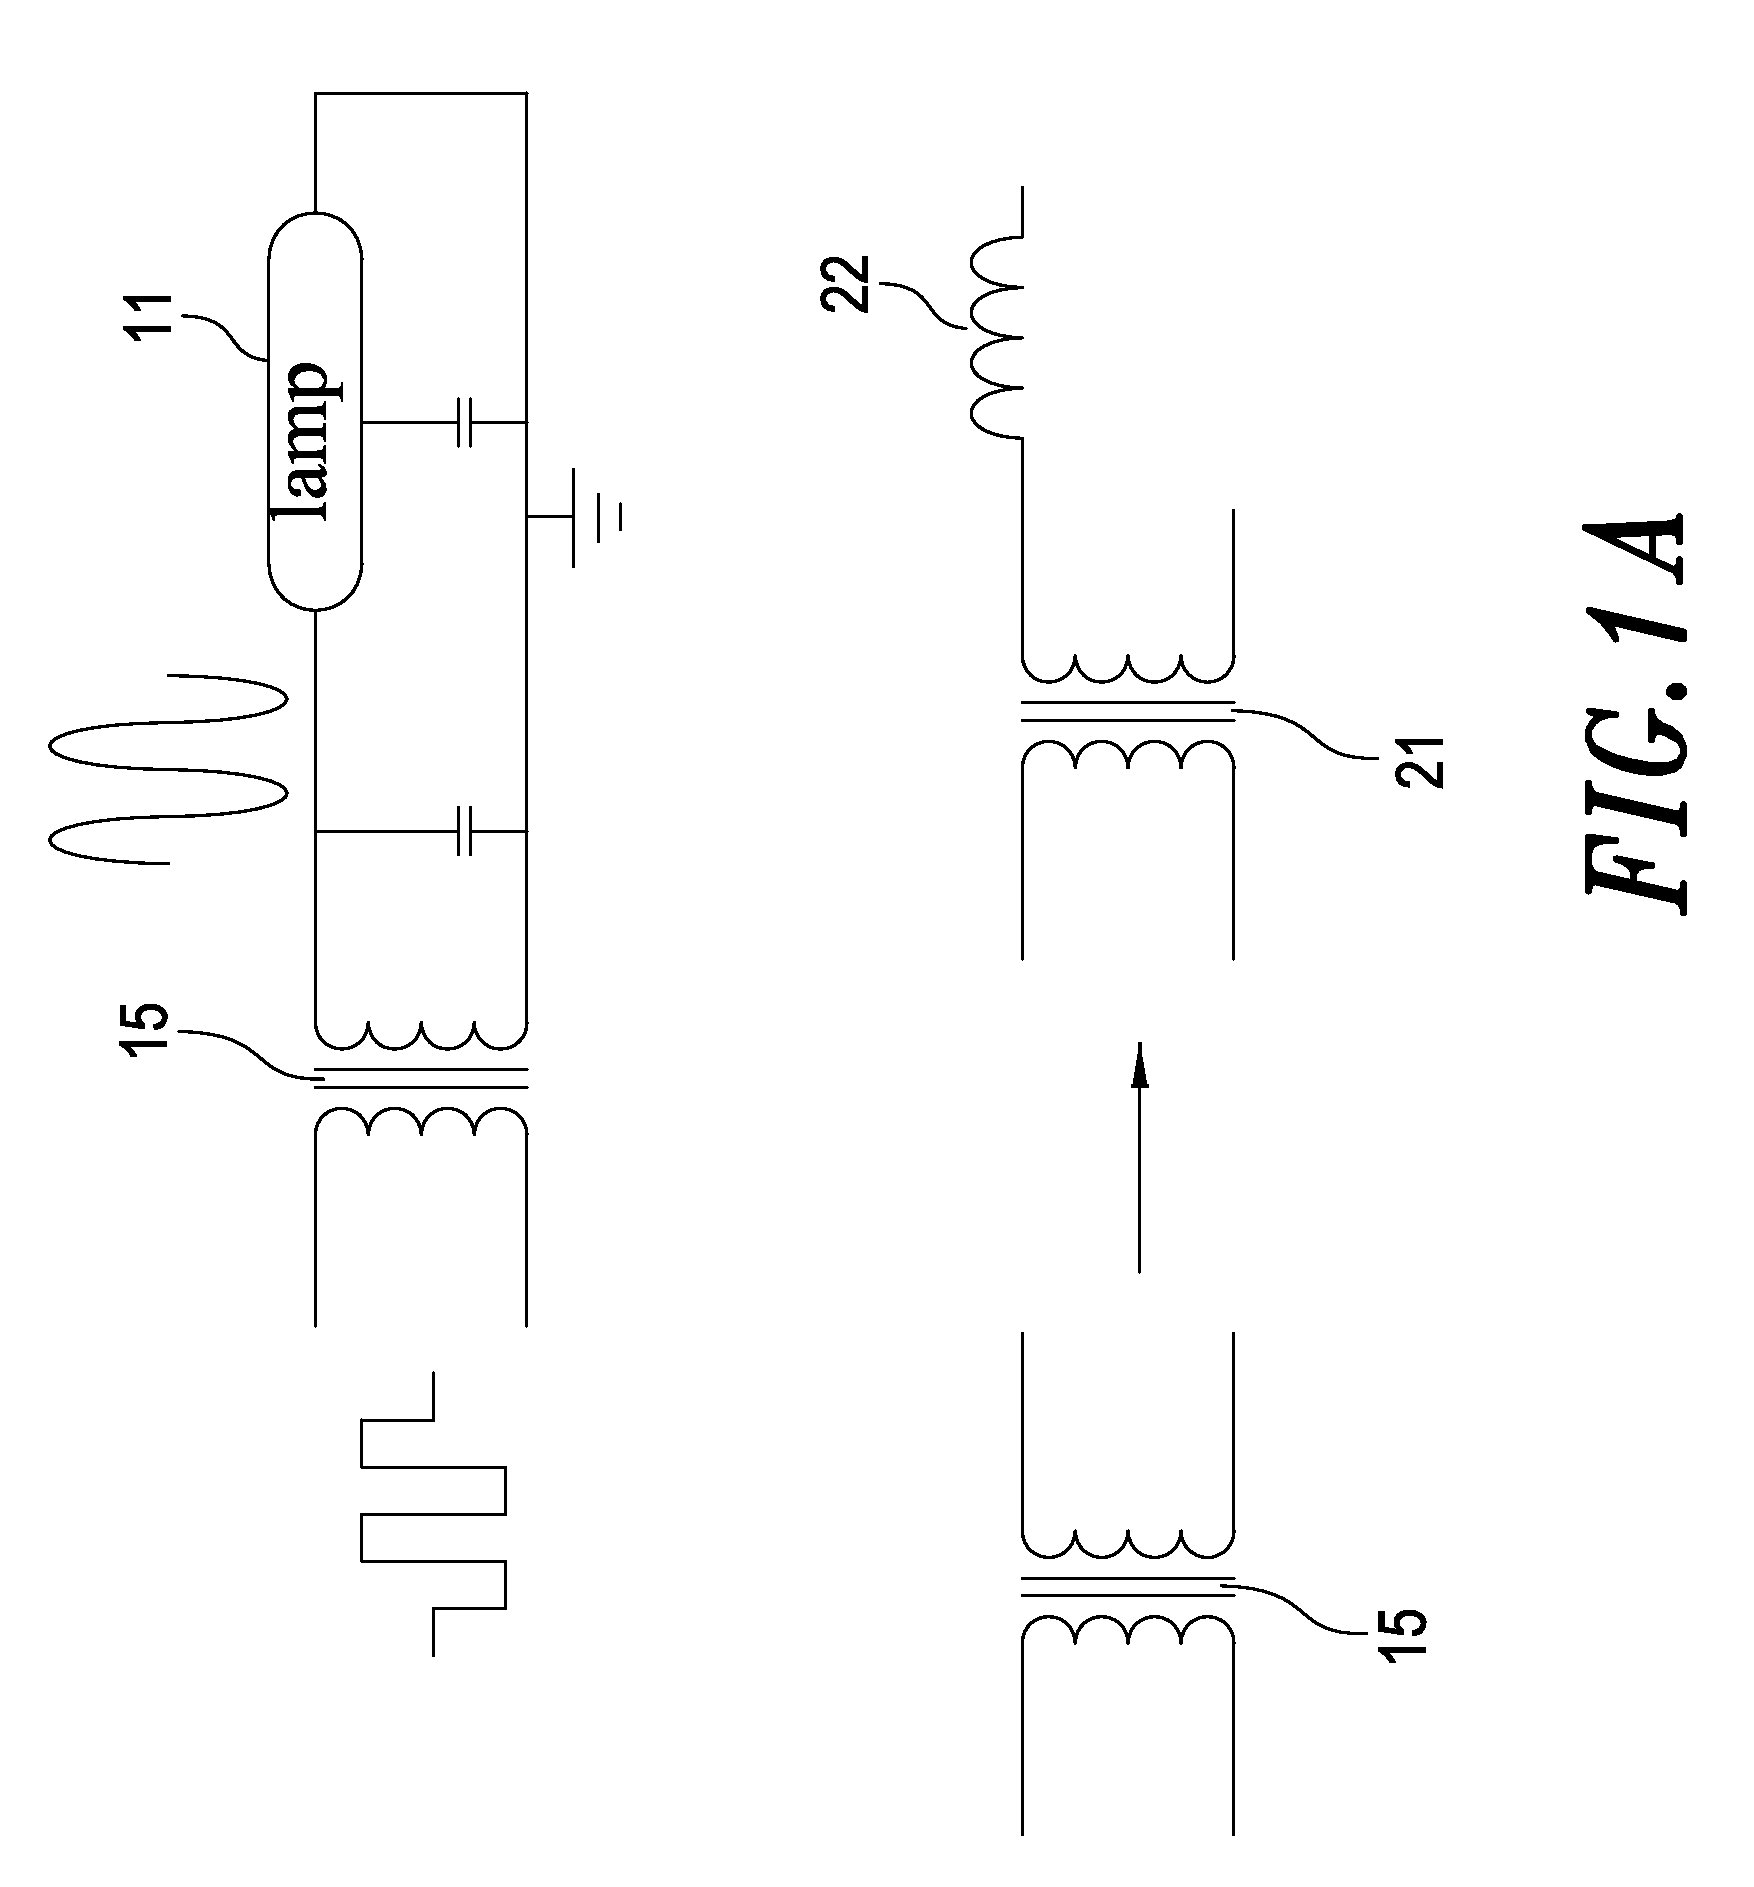 Coupled lamp driving device